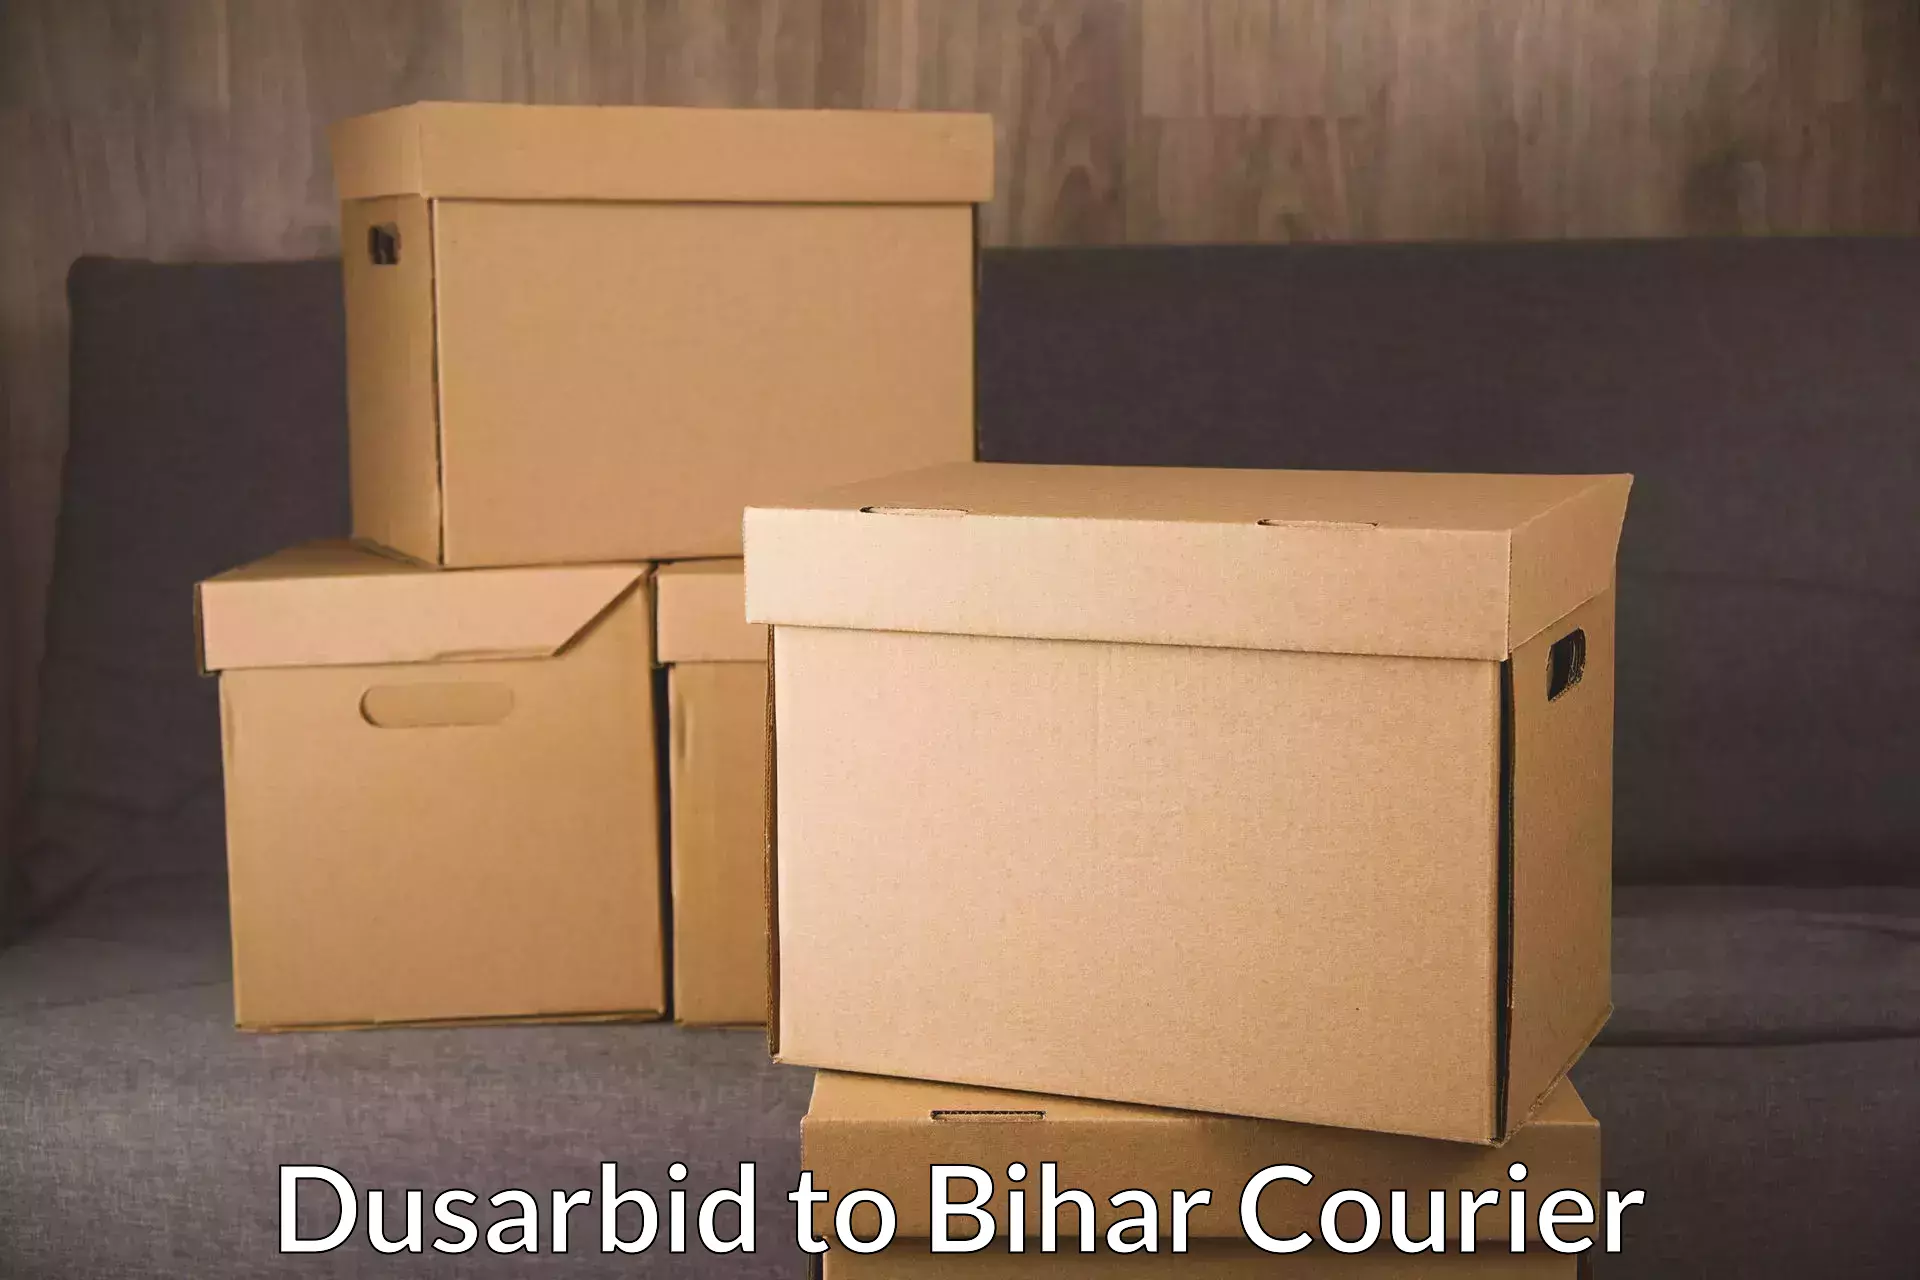 Courier service innovation Dusarbid to Araria